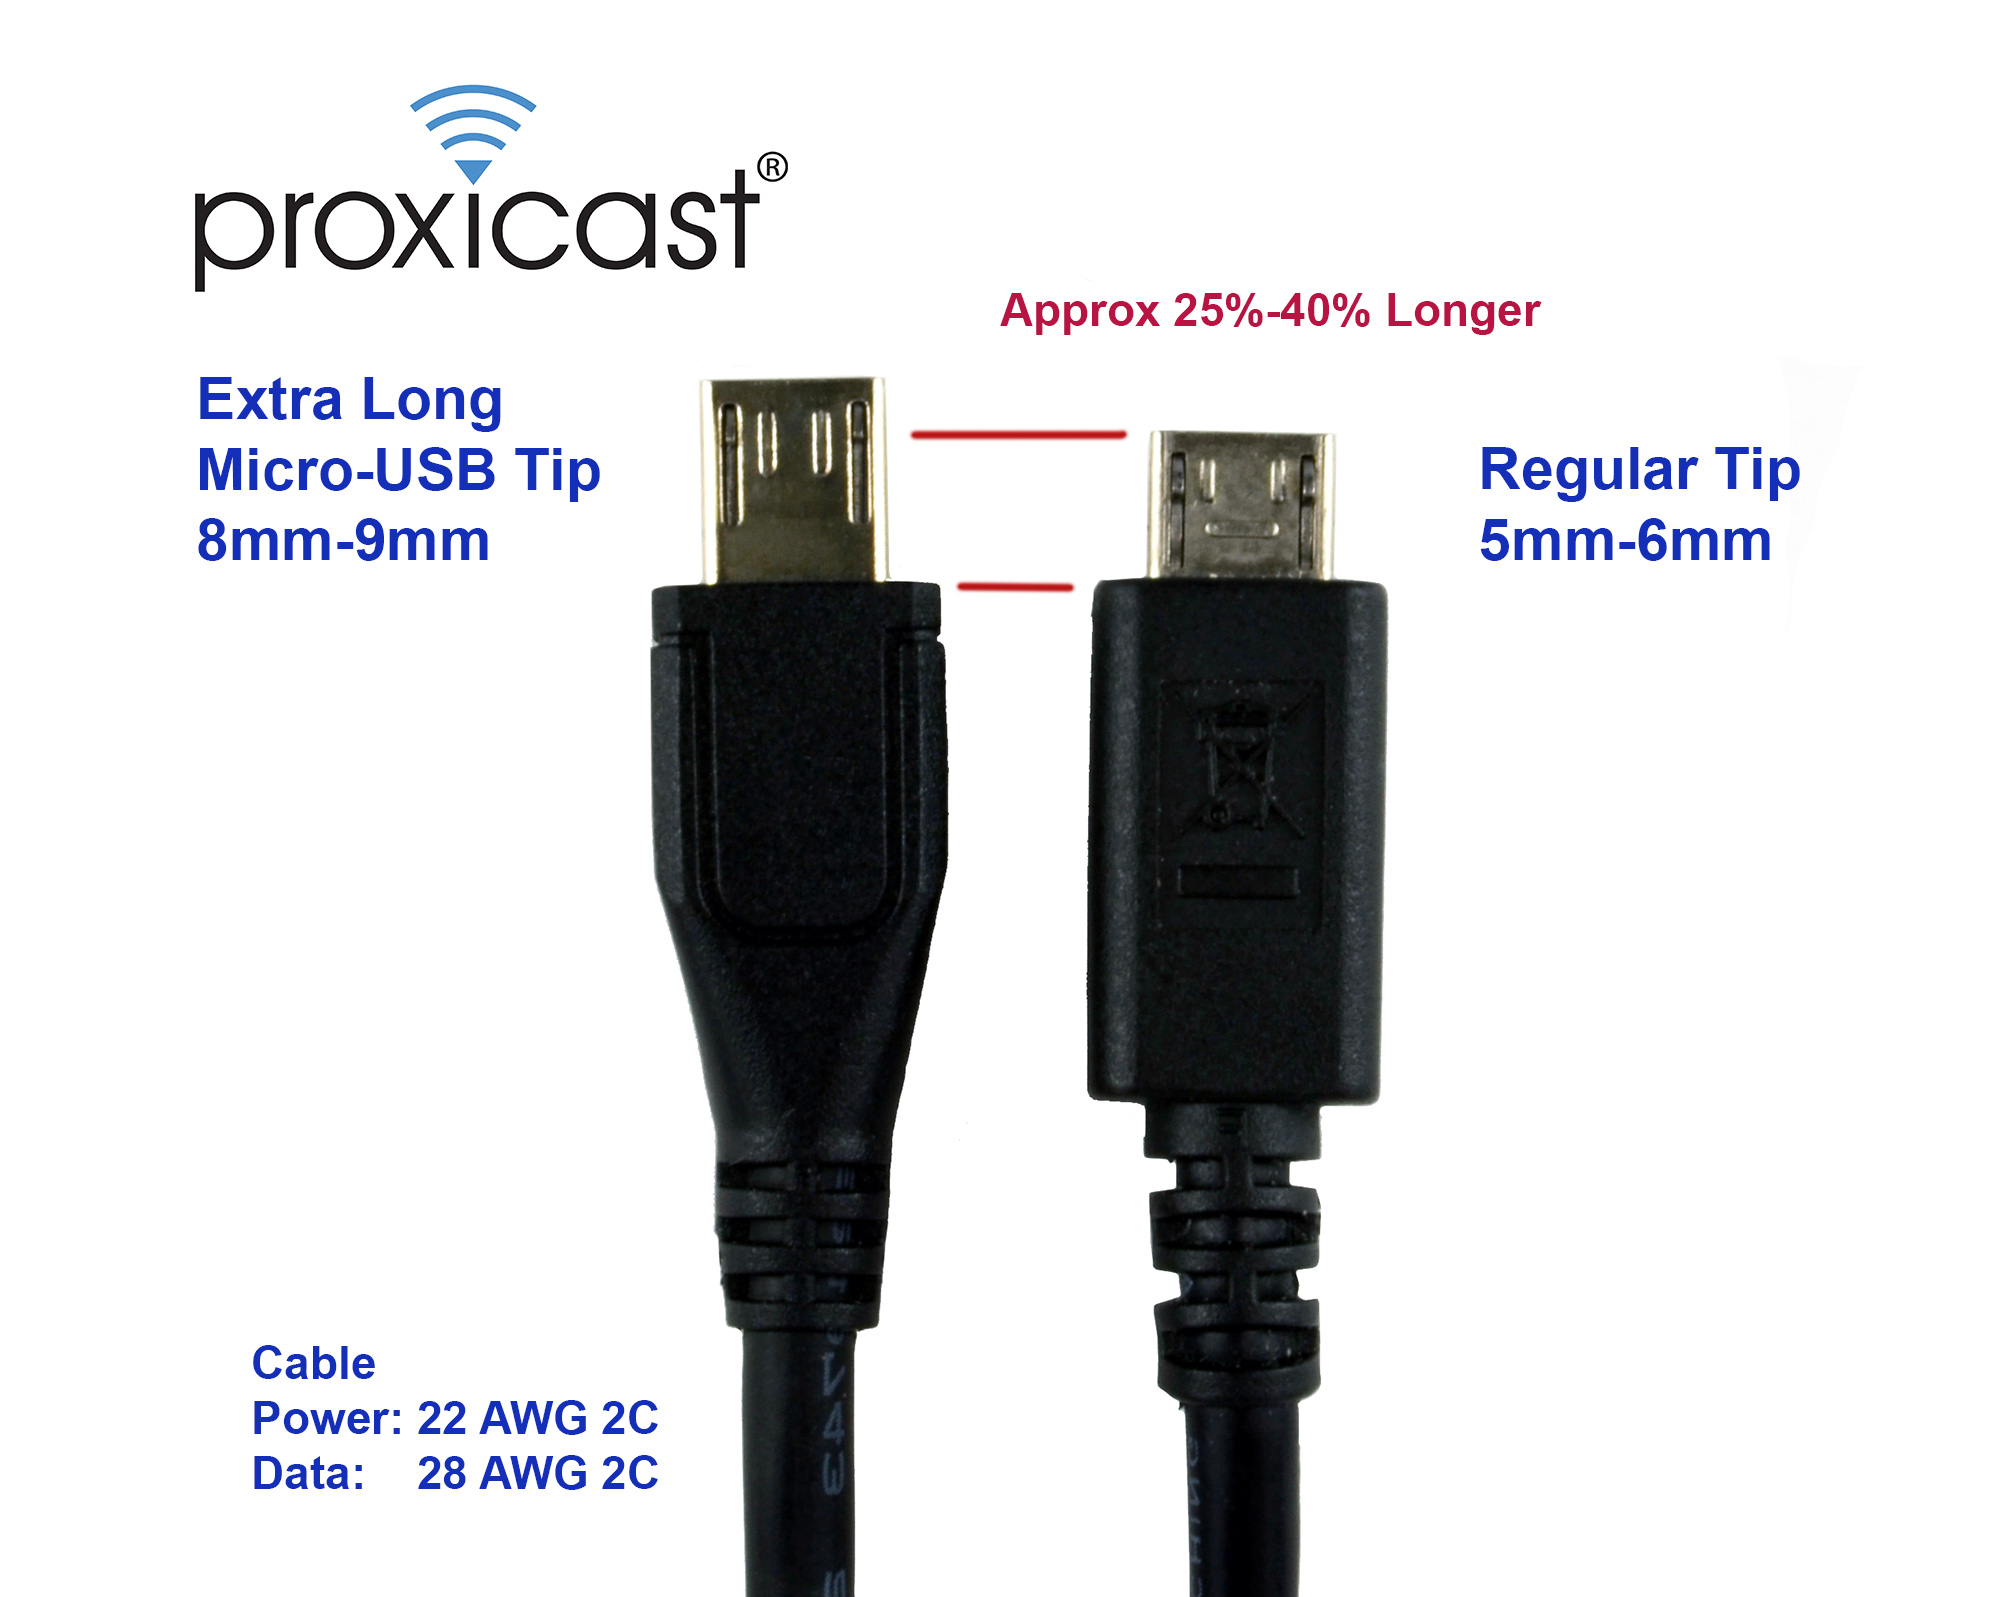 butiksindehaveren Efterår svamp Special 8mm Extra Long Tip MicroUSB Male - to - USB A Male Cable - 6ft -  Proxicast